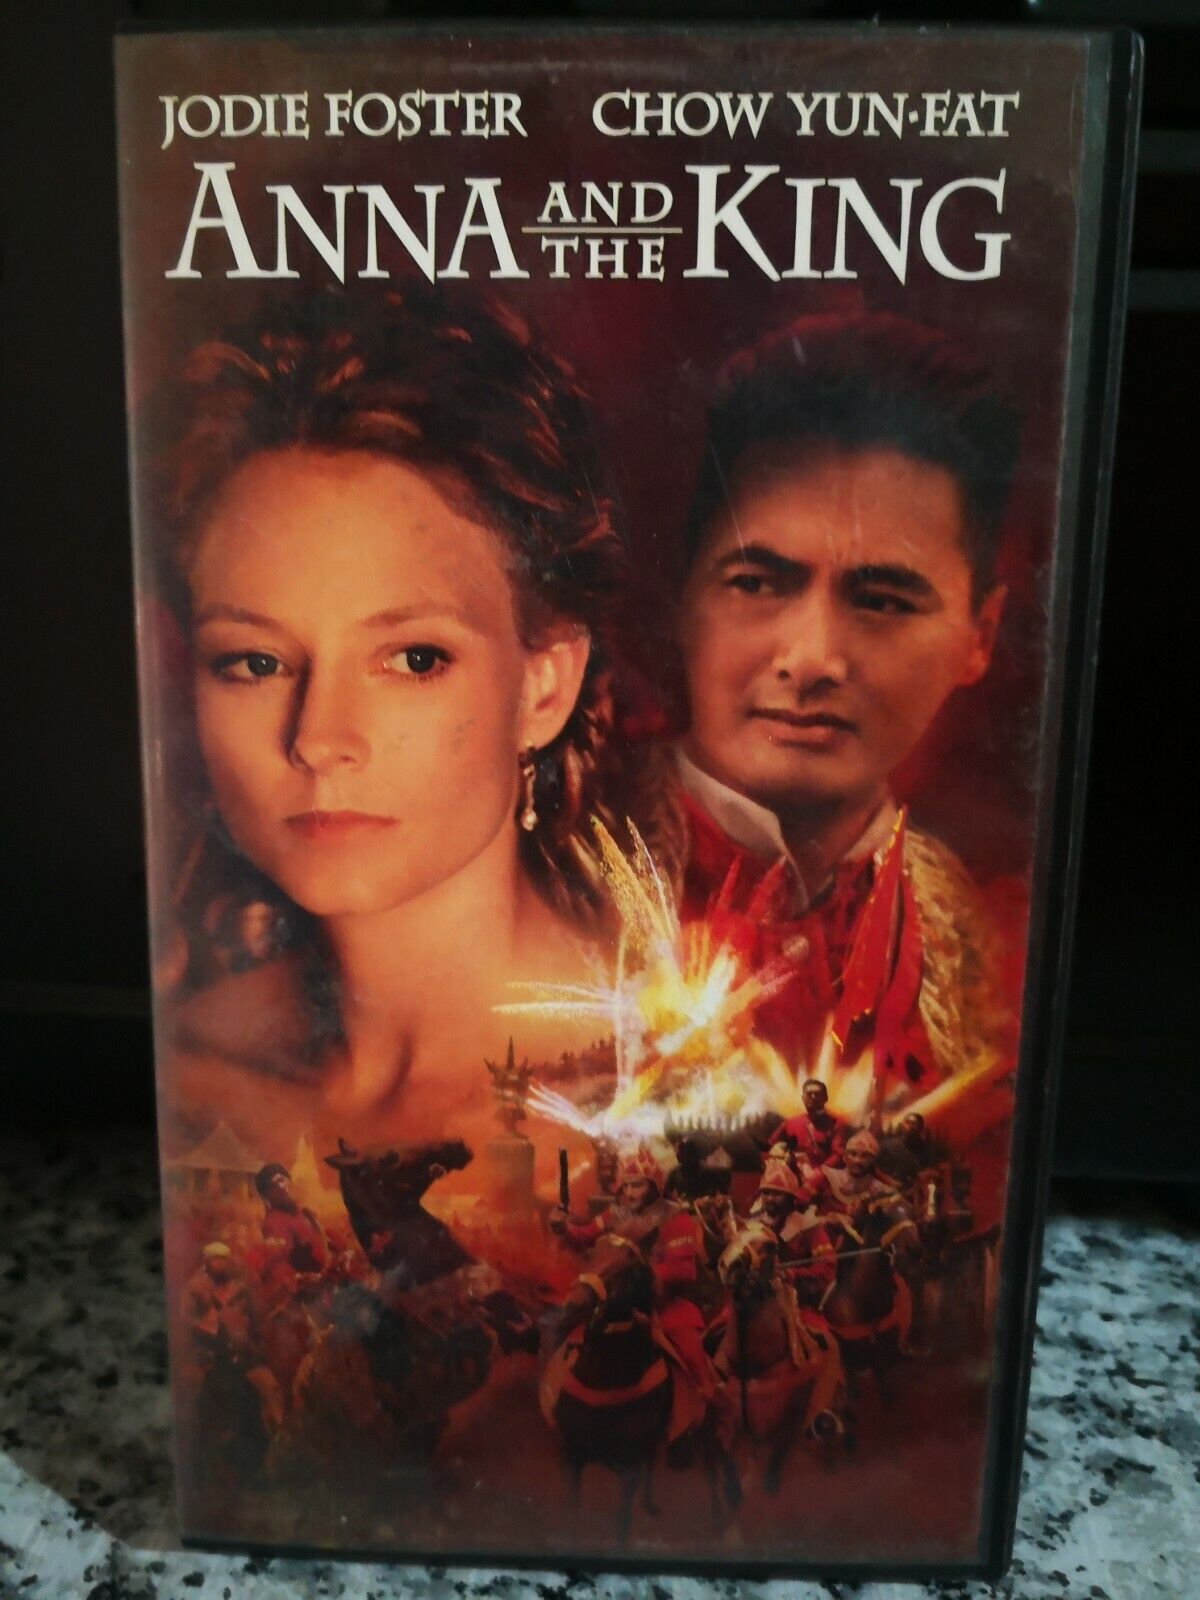 Anna and the King -Vhs - 1999 - Century fox -F